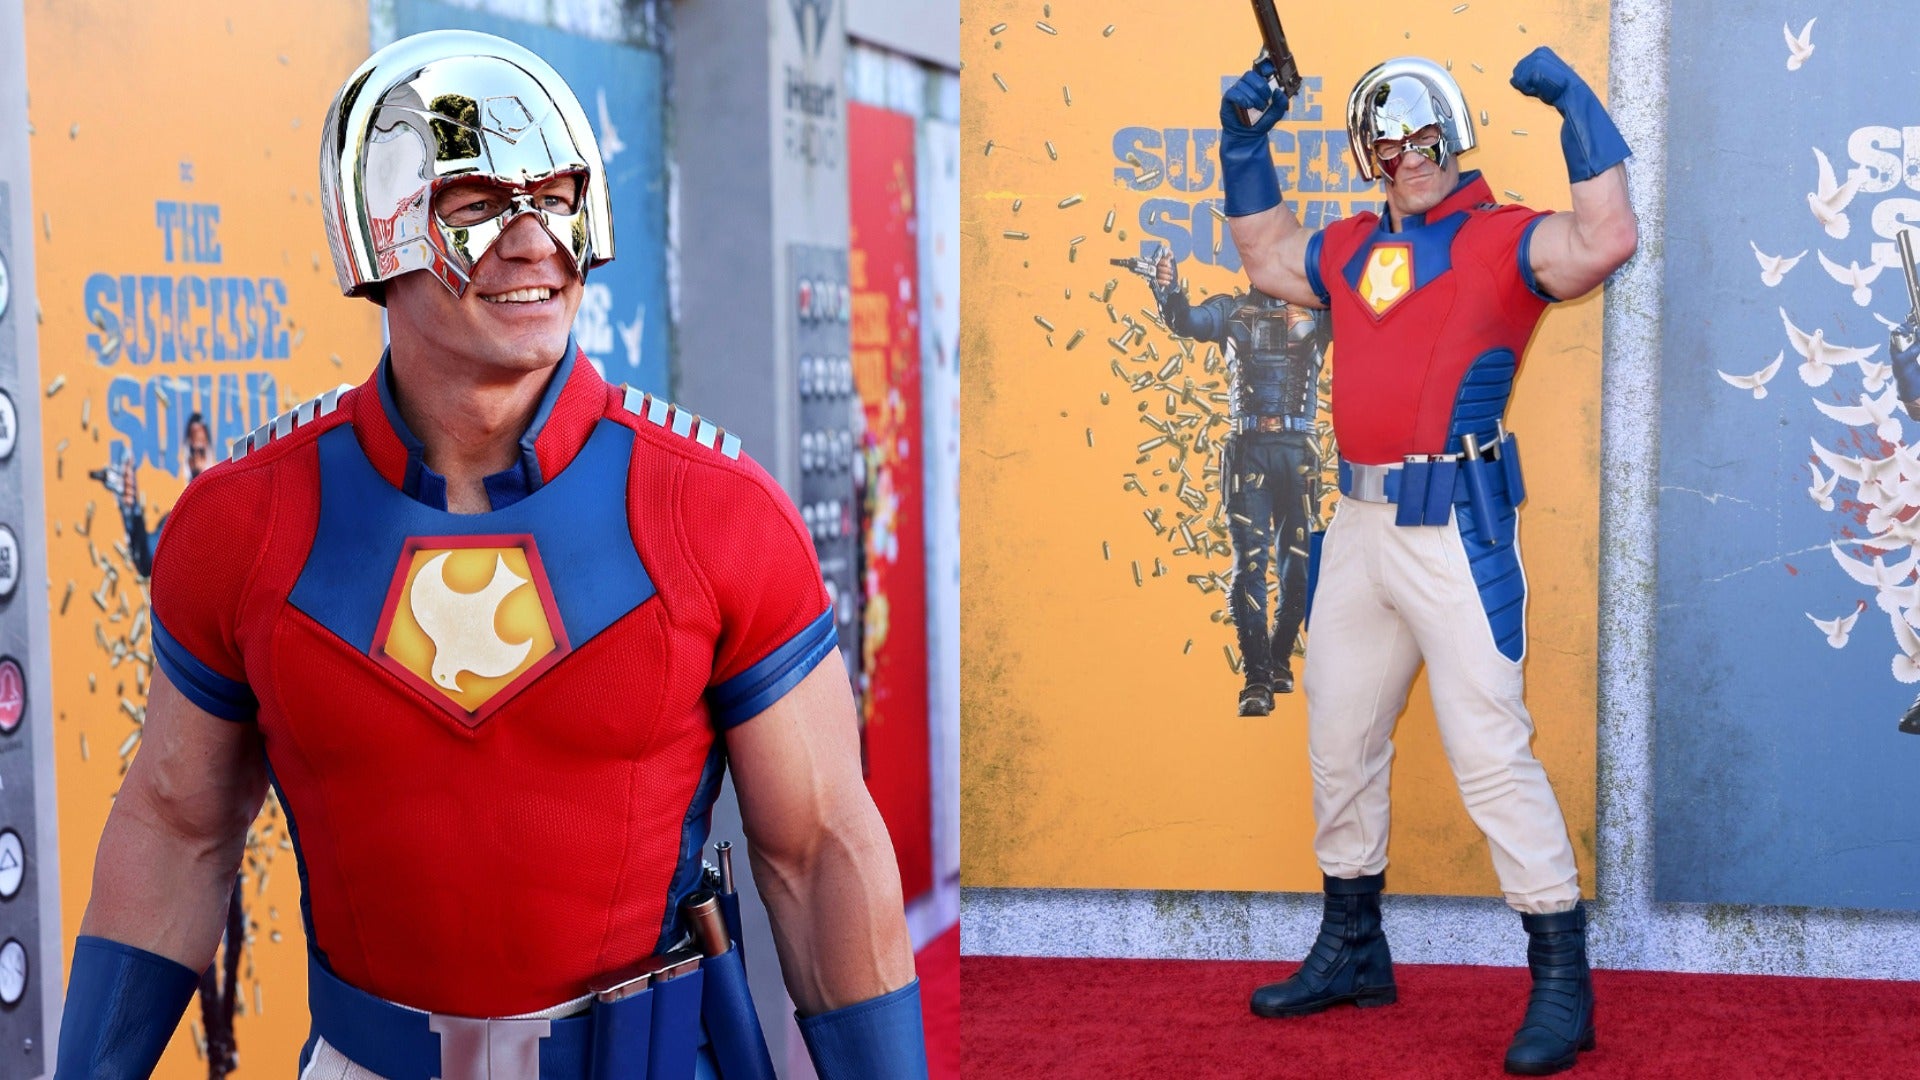 John Cena as Peacemaker at The Suicide Squad premiere